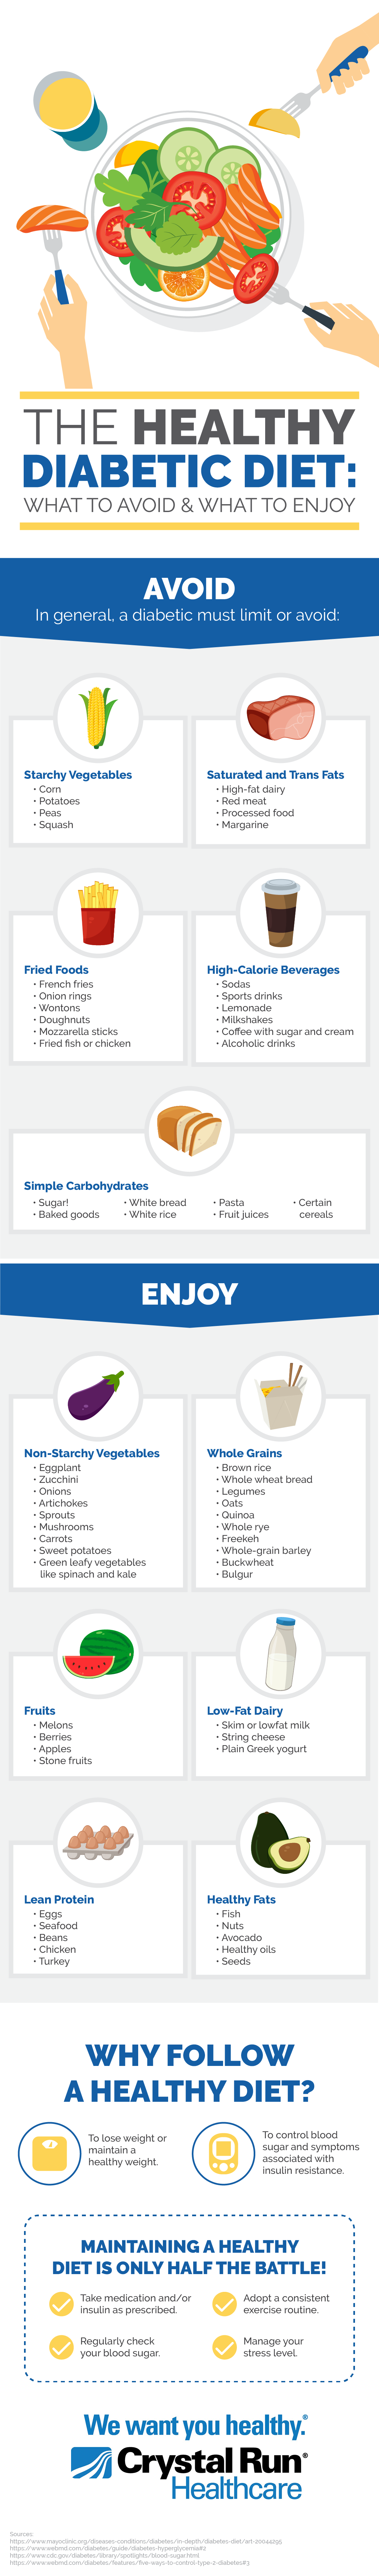 The Healthy Diabetic Diet Infographic